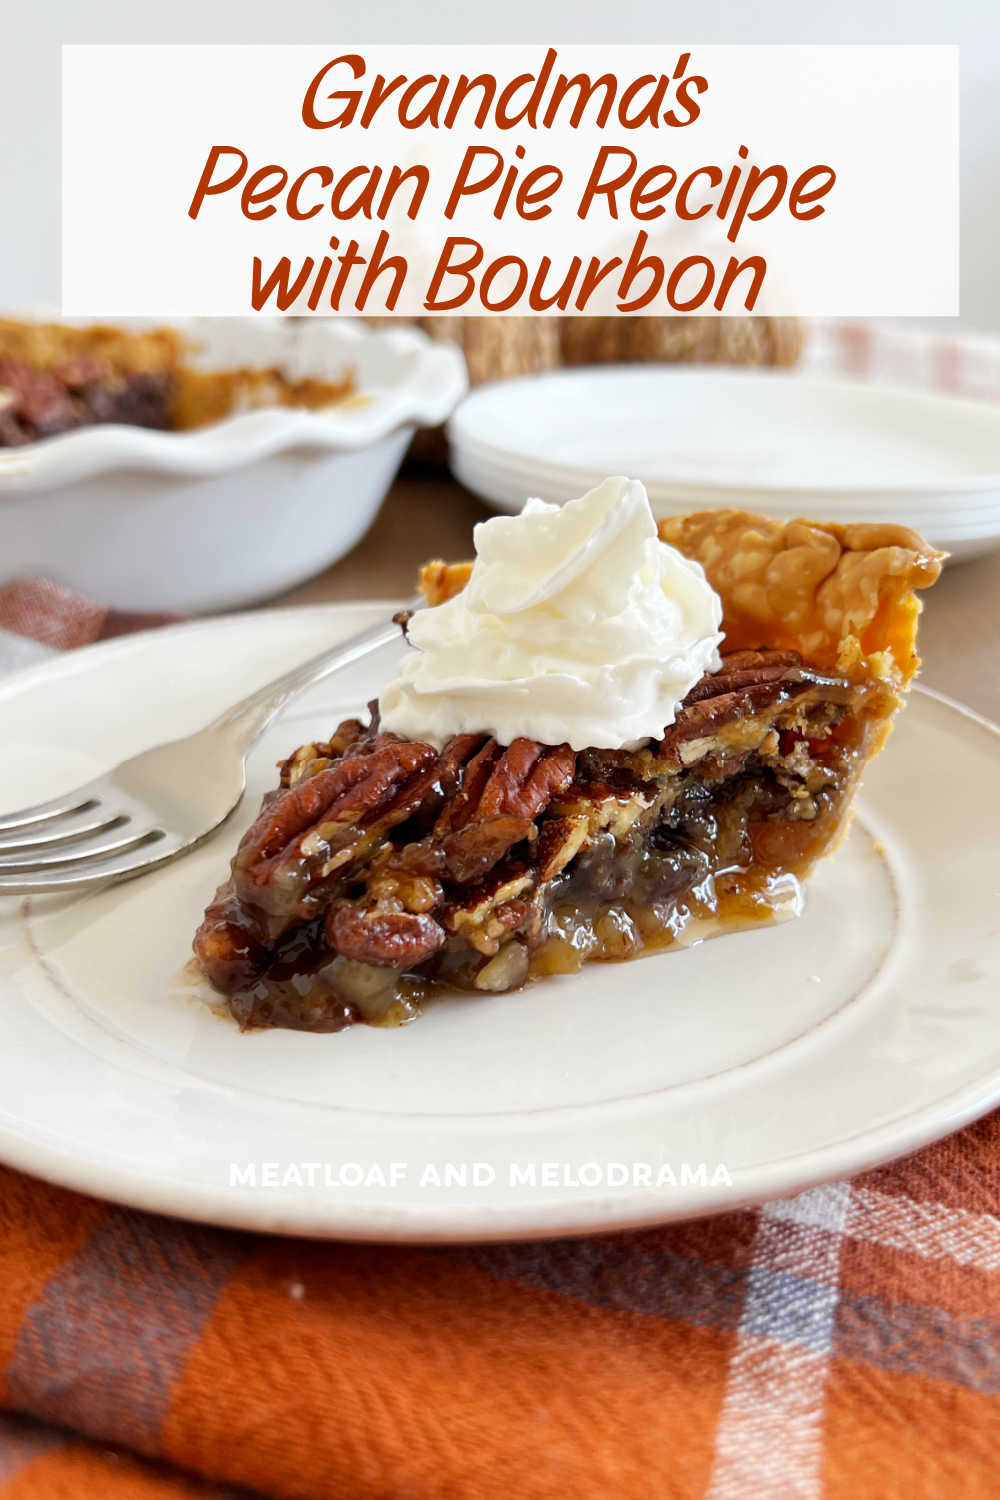 Grandma's pecan pie recipe with bourbon and chocolate chips is an easy dessert perfect for Thanksgiving dinner and the holiday season. A family favorite! via @meamel